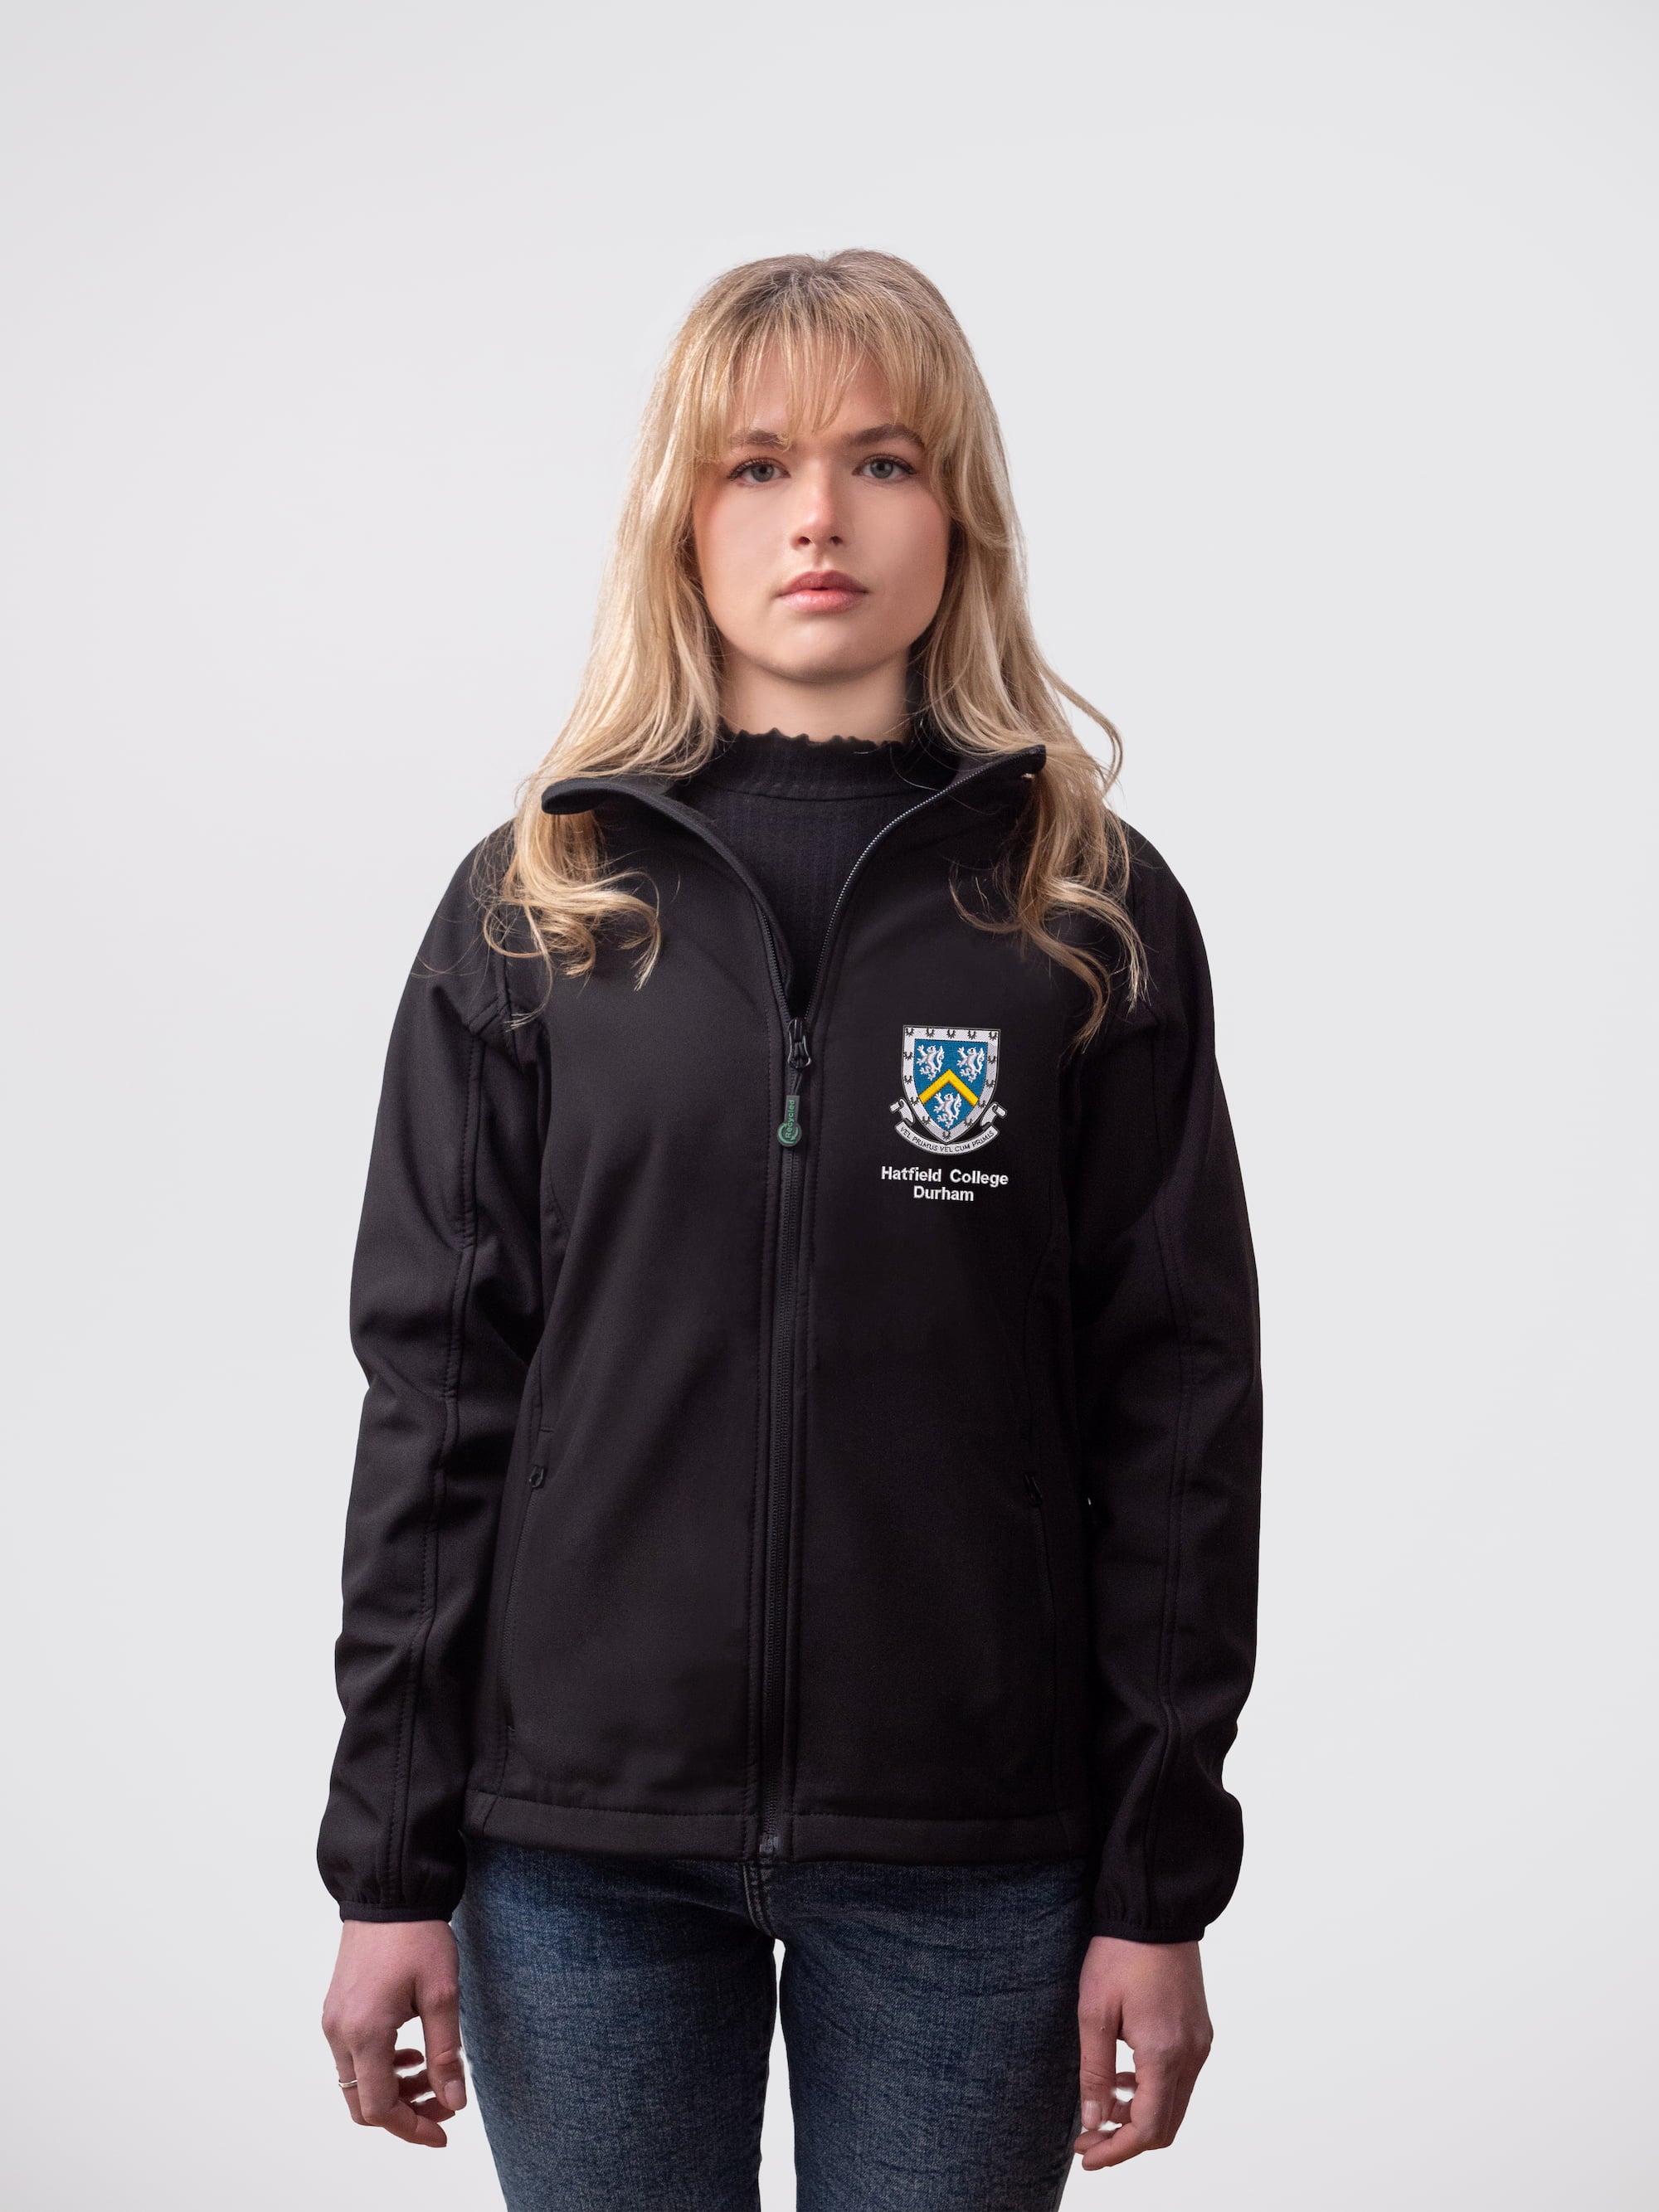 A student wearing a sustainable, Hatfield College embroidered jacket